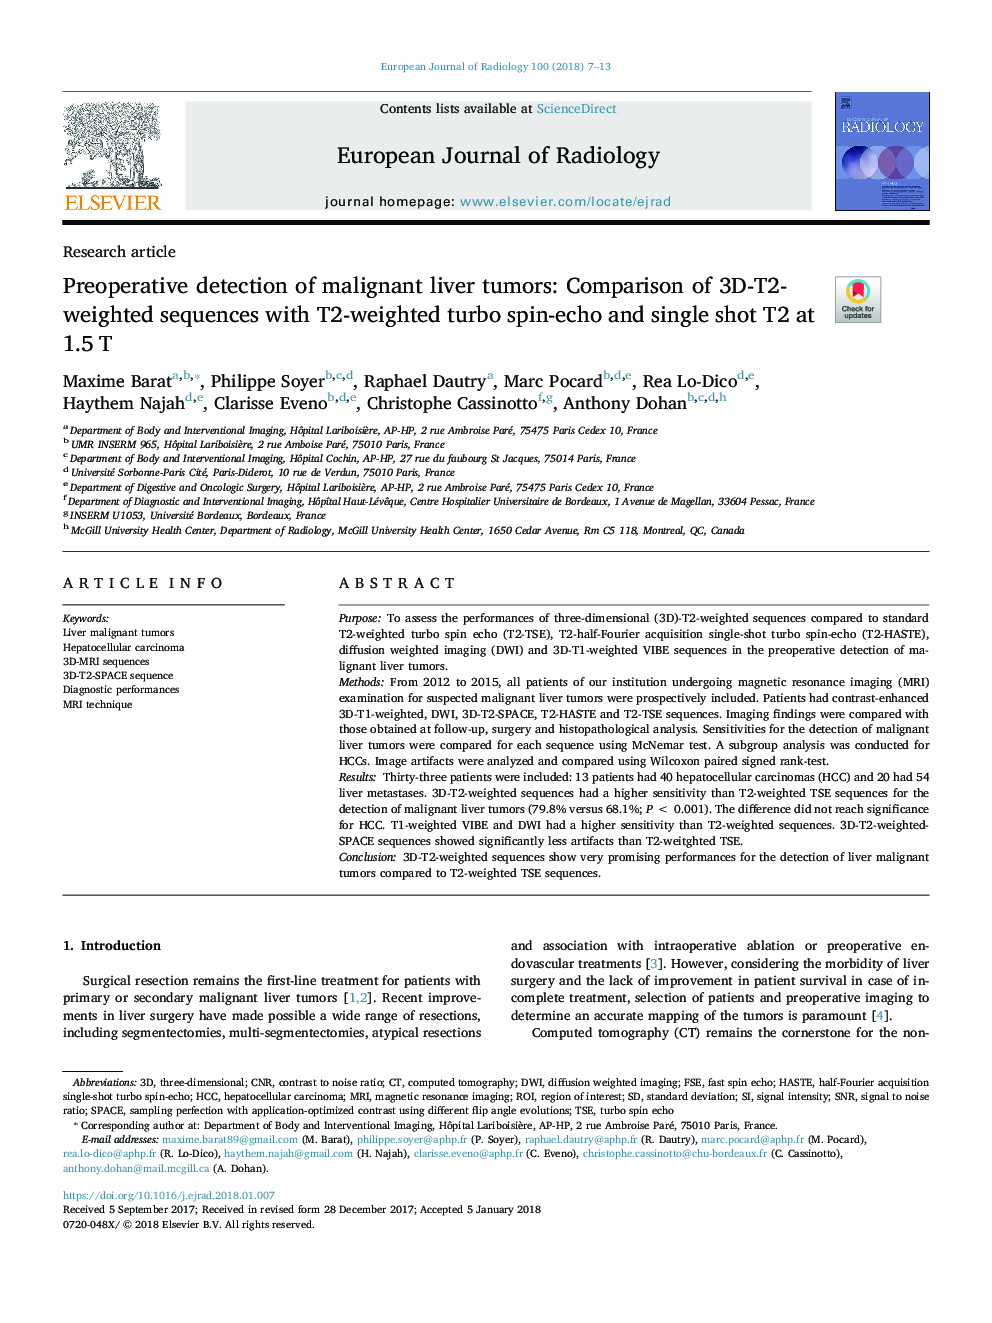 Preoperative detection of malignant liver tumors: Comparison of 3D-T2-weighted sequences with T2-weighted turbo spin-echo and single shot T2 at 1.5â¯T